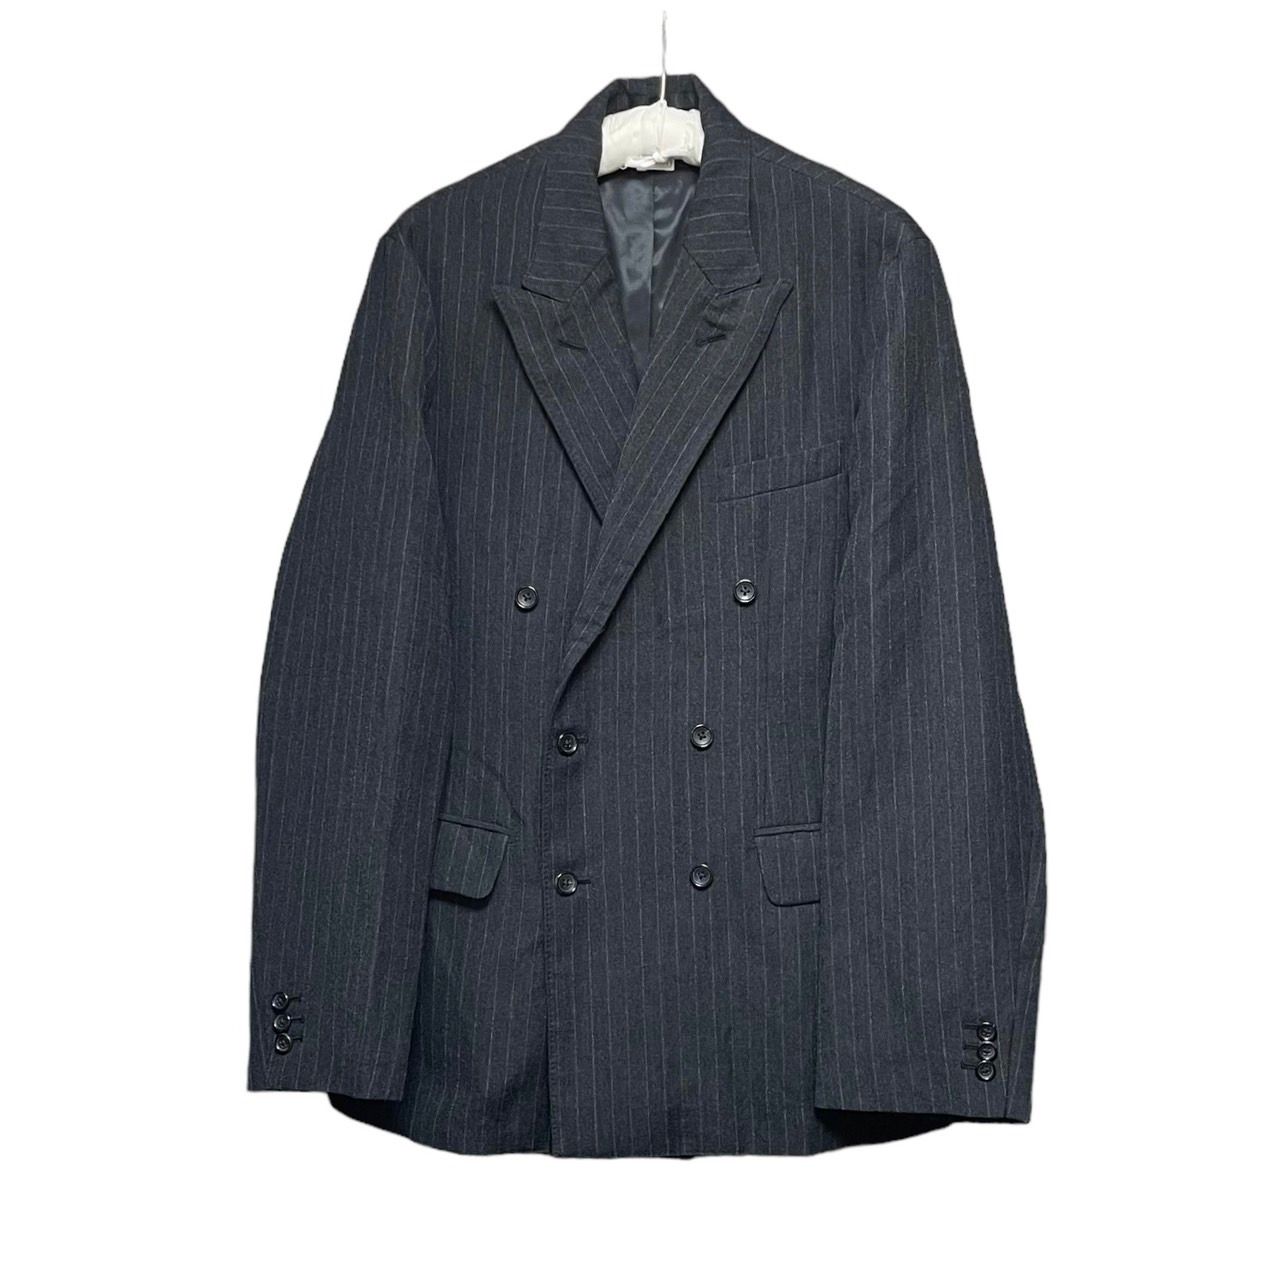 A.PRESSE アプレッセ 22AW Double Breasted Jacket ダブルブレステッドストライプジャケット 22AAP-01-05M